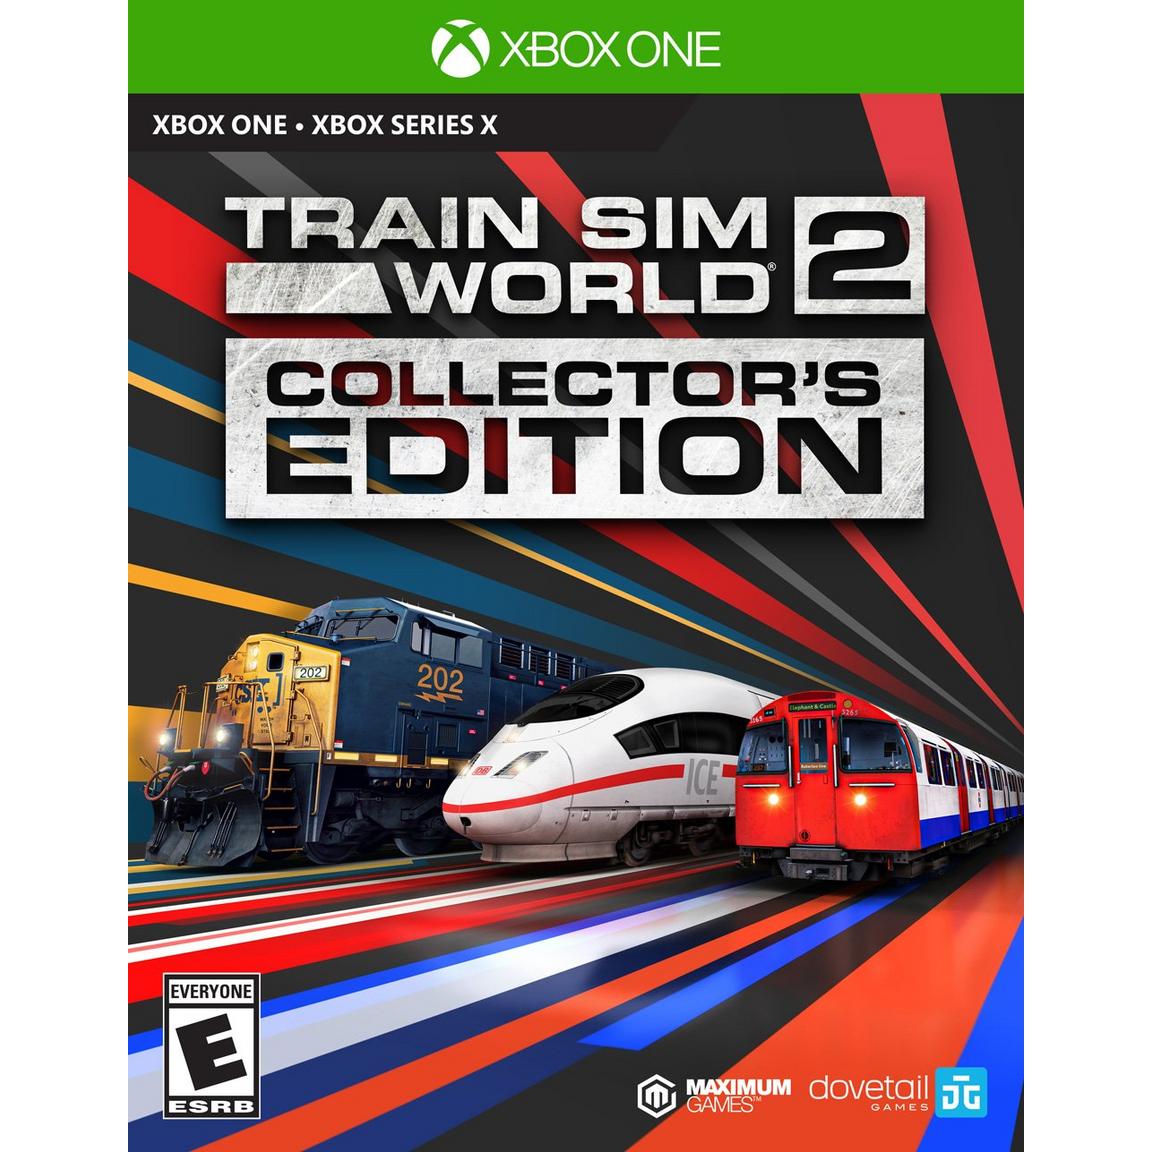 Train Sim World 2: Collector's Edition - Xbox One, Pre-Owned -  Maximum Games